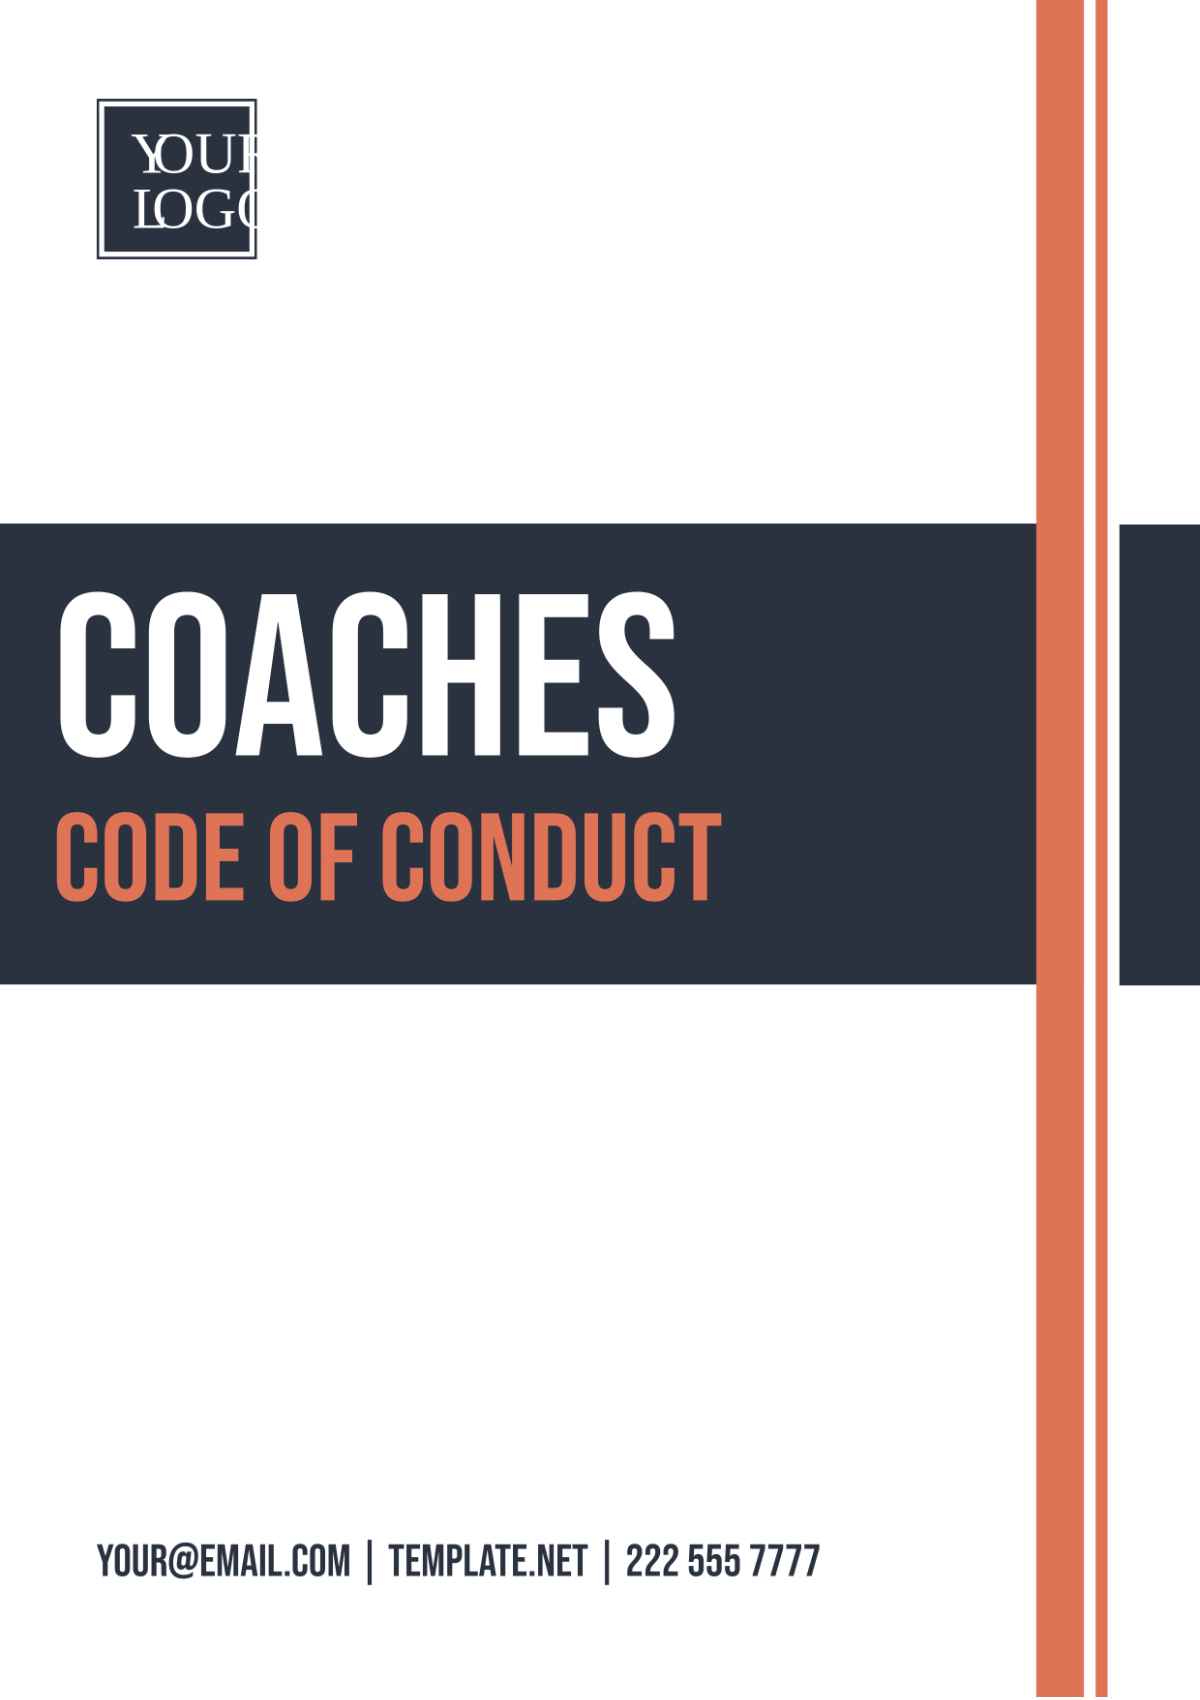 Coaches Code of Conduct Template